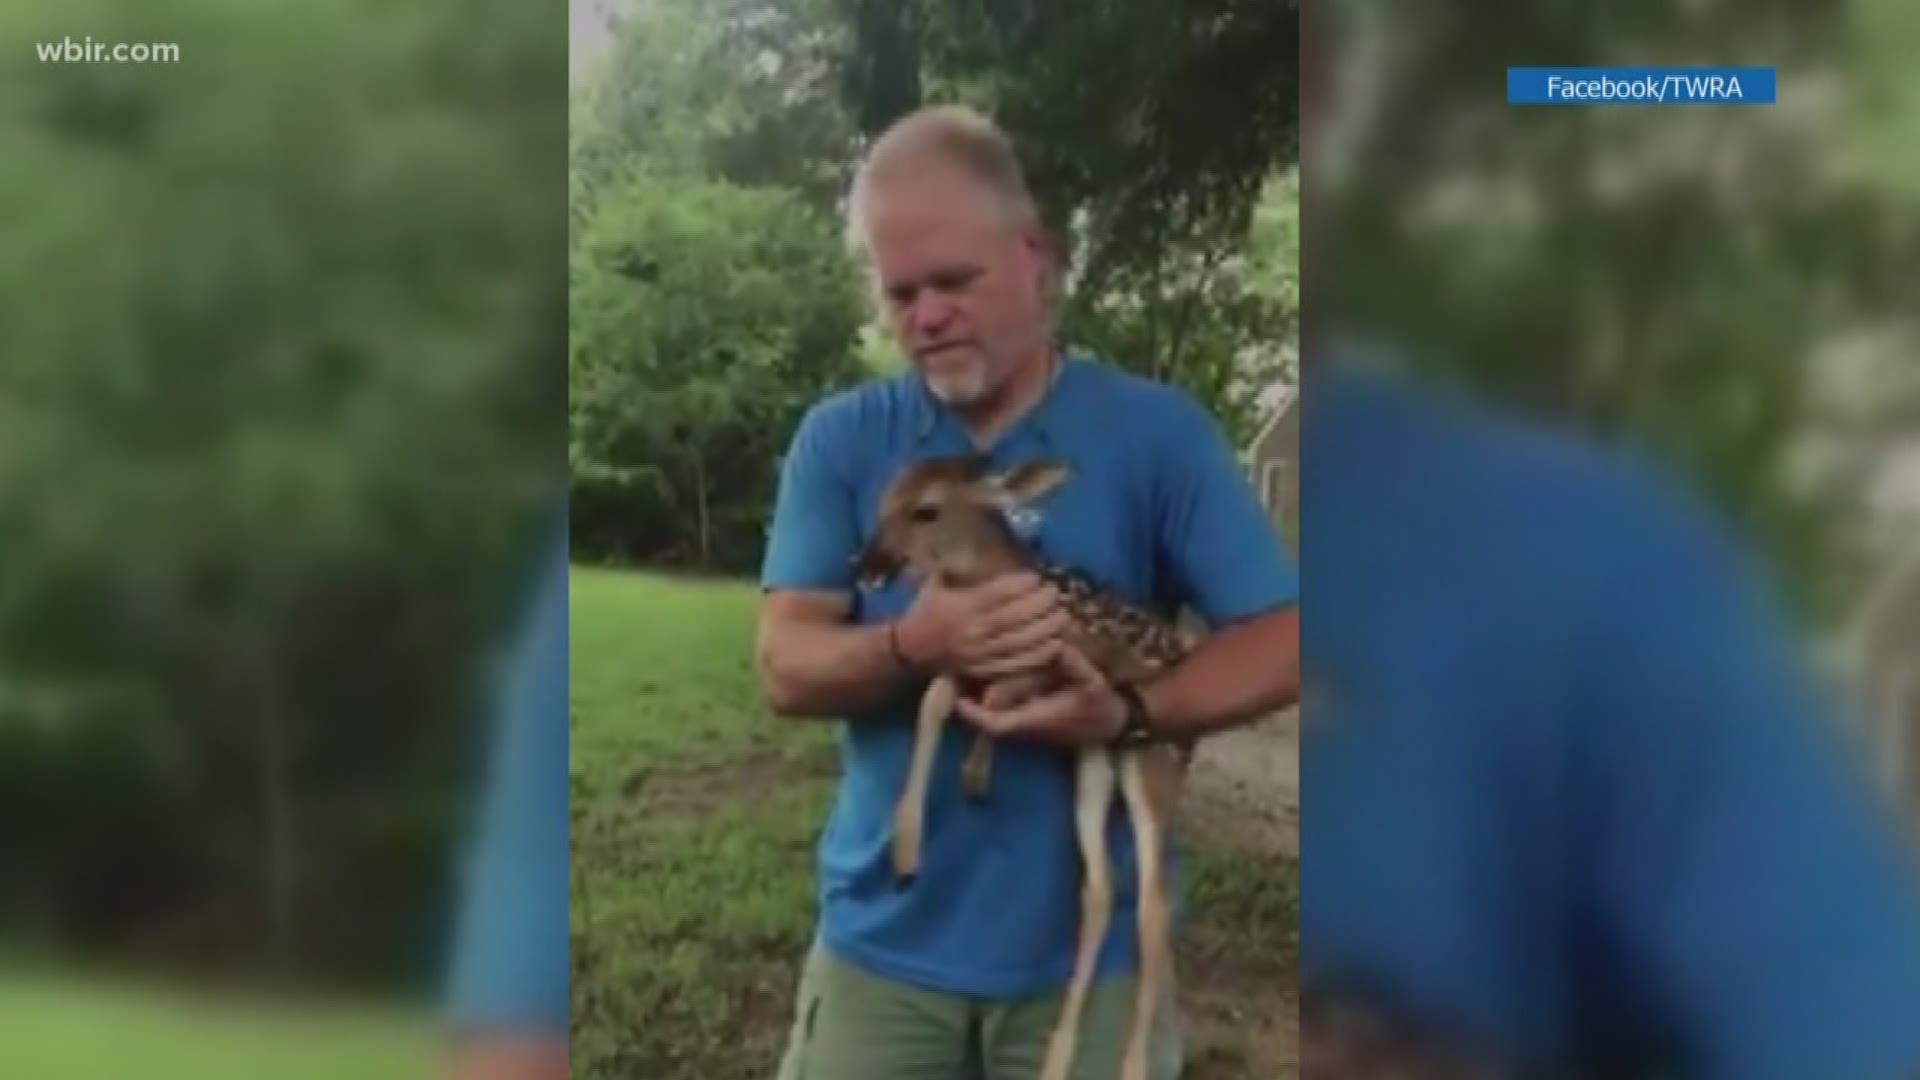 A Shelby County TWRA officer found a fawn trapped inside a wood pile at his home. He was able to rescue the deer and reunite it with its mother.